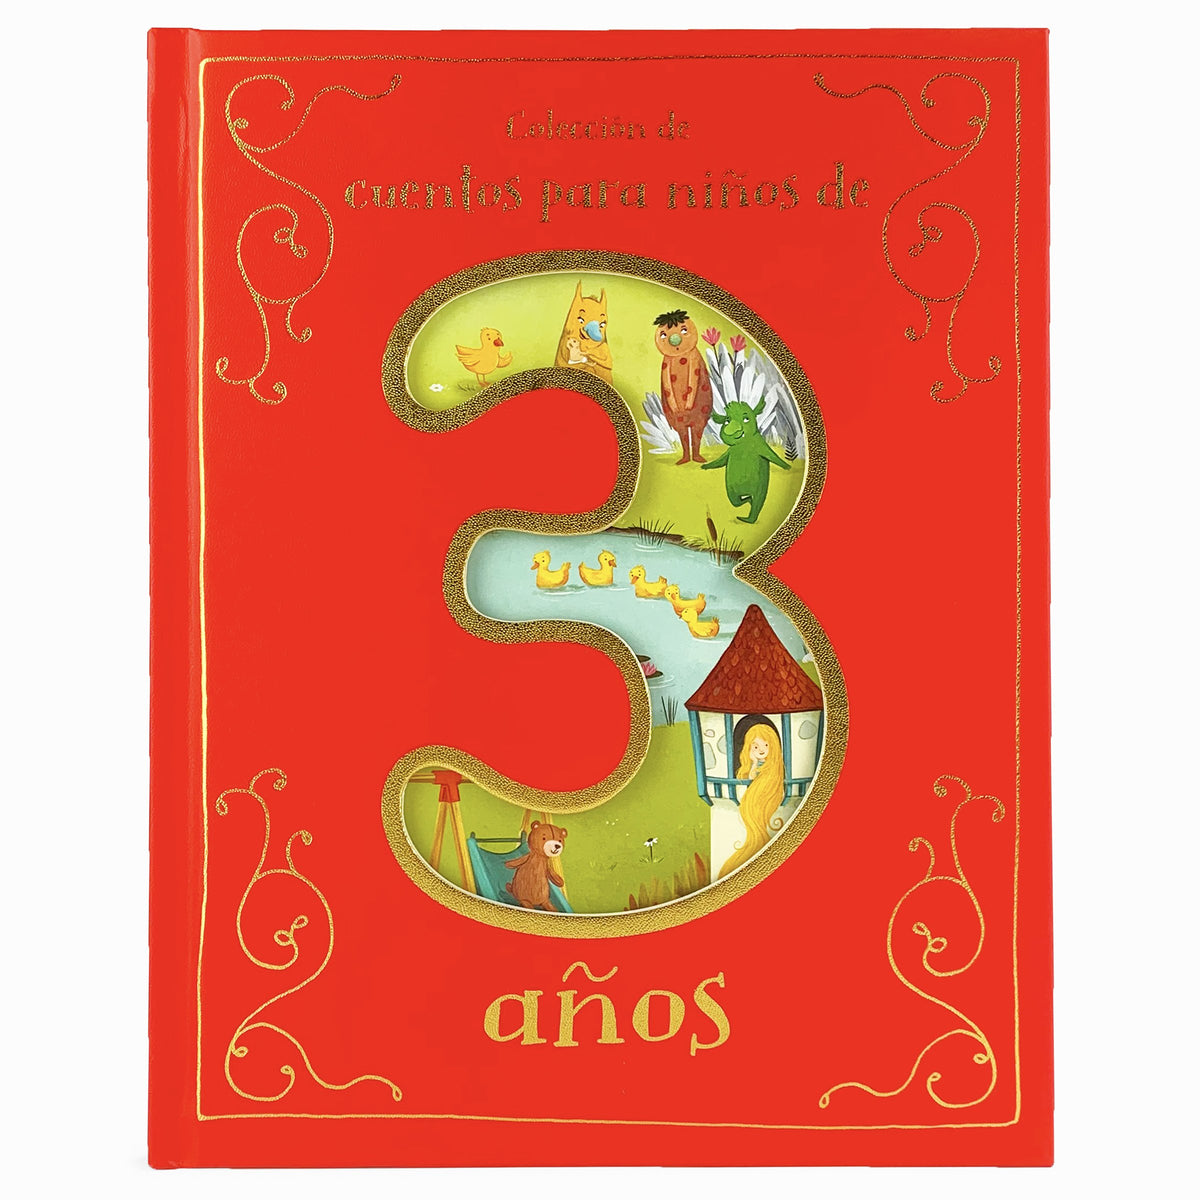 Cuentos infantiles 2 años: Lote de 3 libros para regalar a niños de 2 años  (Cuentos infantiles para niños) - 3 books in Spanish for 2 year-olds